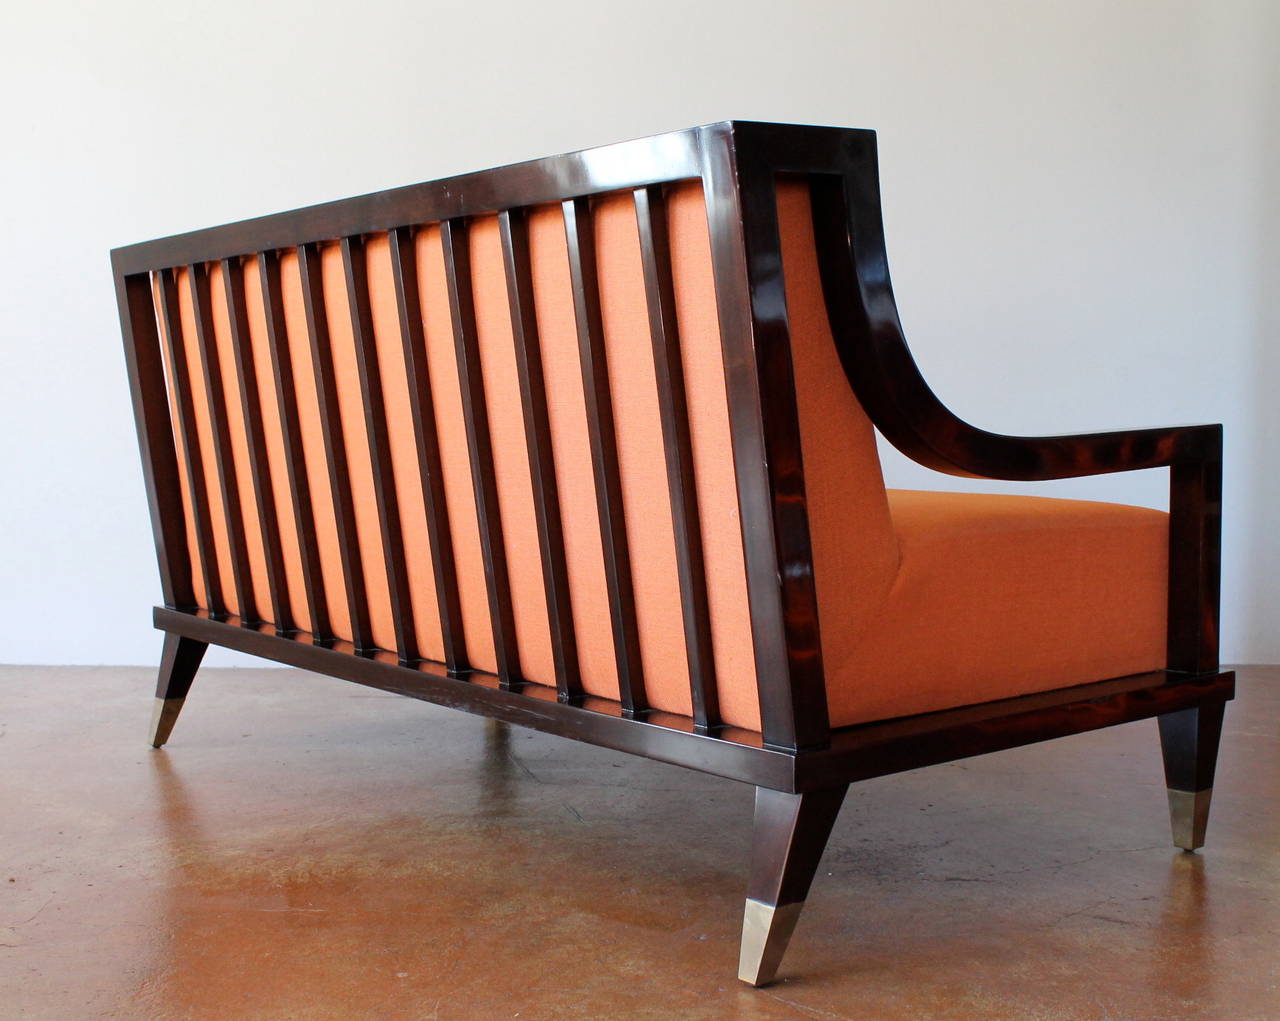 Mexican Exceptional and Documented Robert and Mito Block Settee or Sofa, Mexico, 1948 For Sale